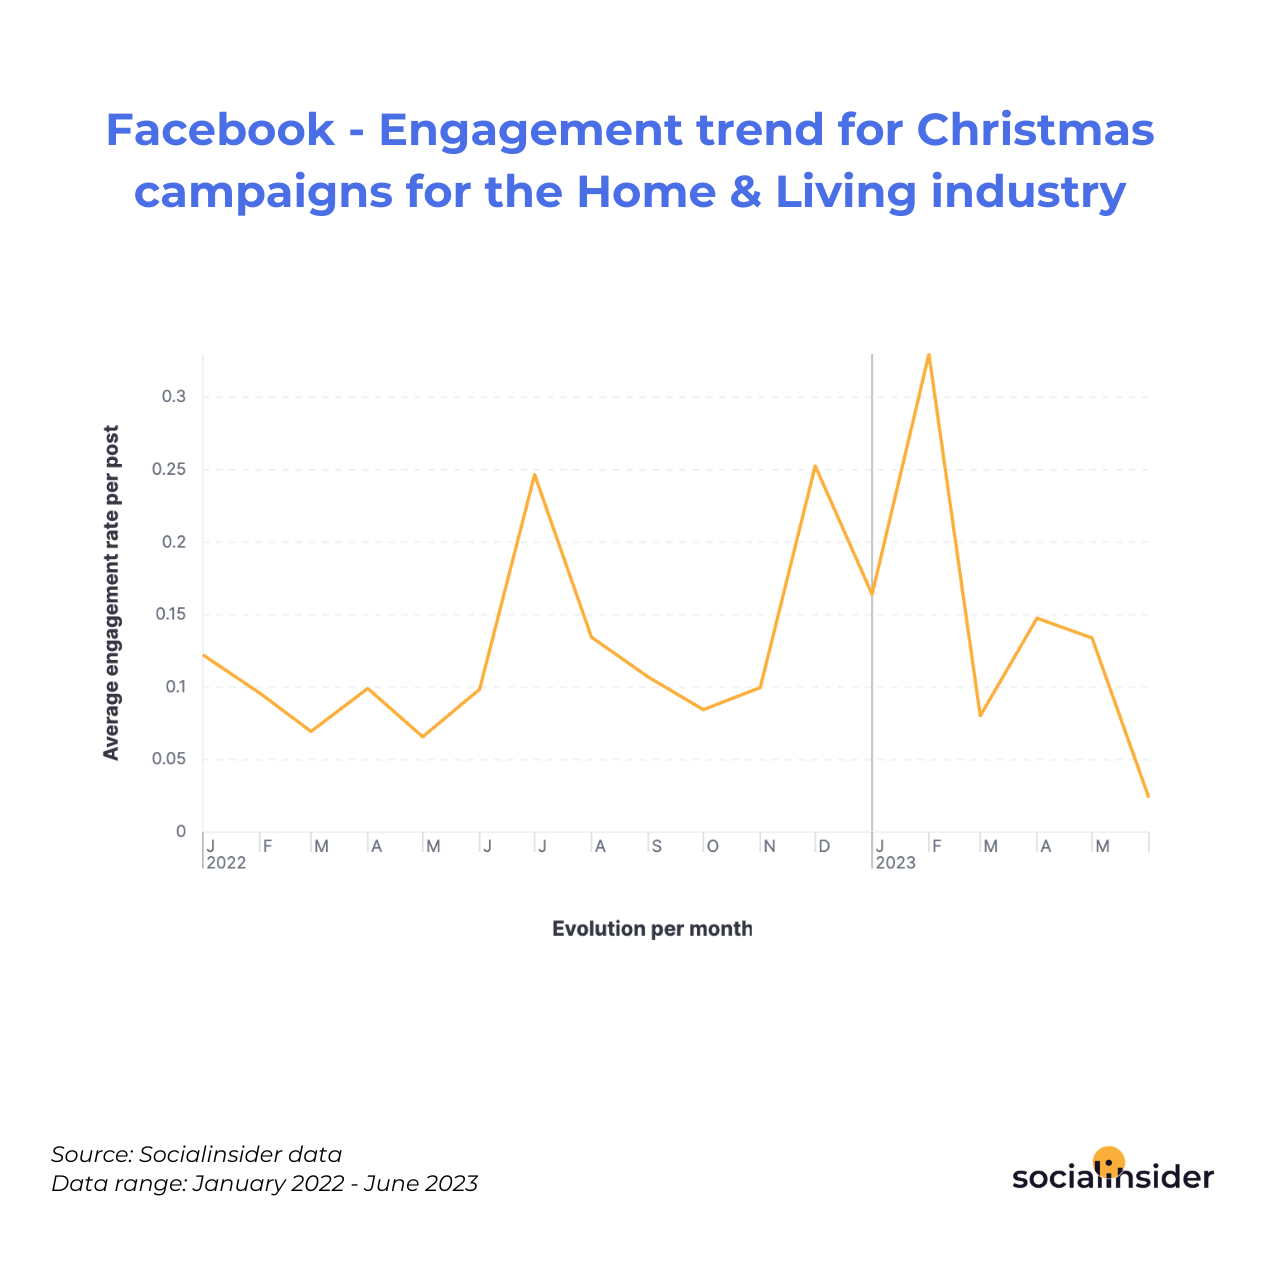 Facebook - Engagement trend for Christmas campaigns for the Home & Living industry